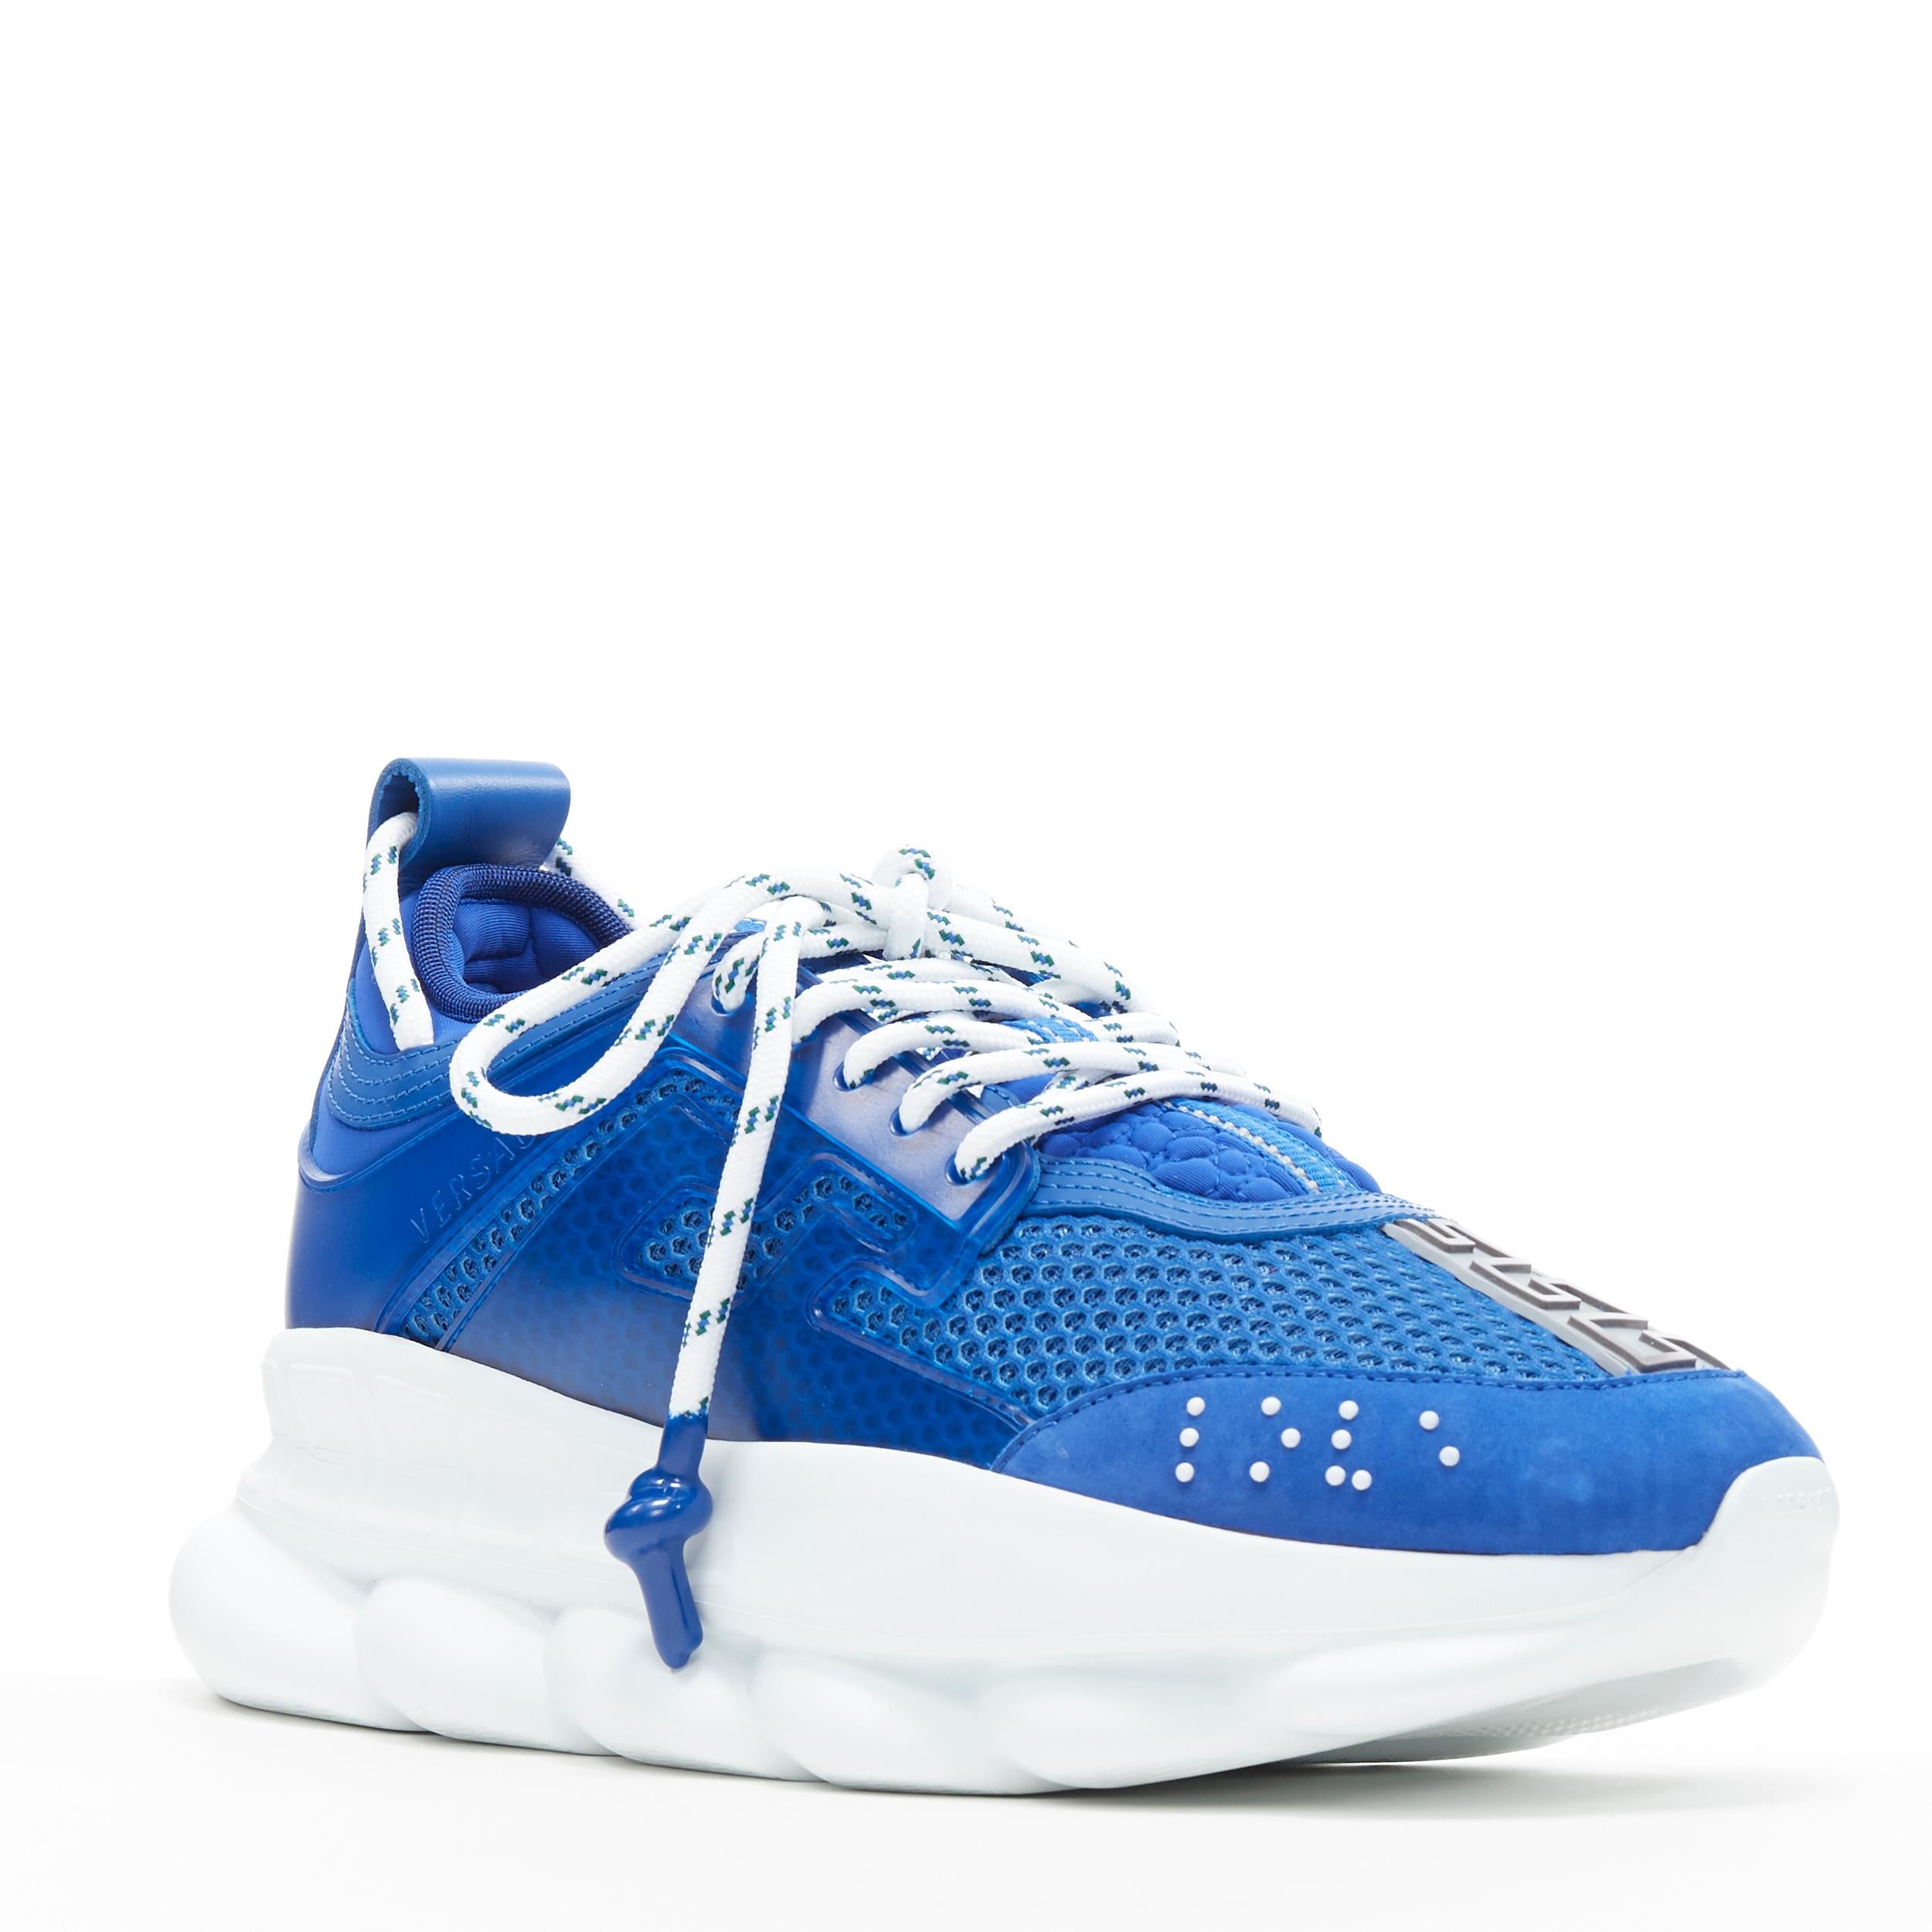 new VERSACE Chain Reaction Bluette 2 white mesh suede chunky sneaker EU38 US5 
Reference: TGAS/B00285 
Brand: Versace 
Designer: Salehe Bembury 
Model: Chain Reaction Bluette 2 
Material: Leather 
Color: Blue 
Pattern: Solid 
Closure: Lace up 
Extra